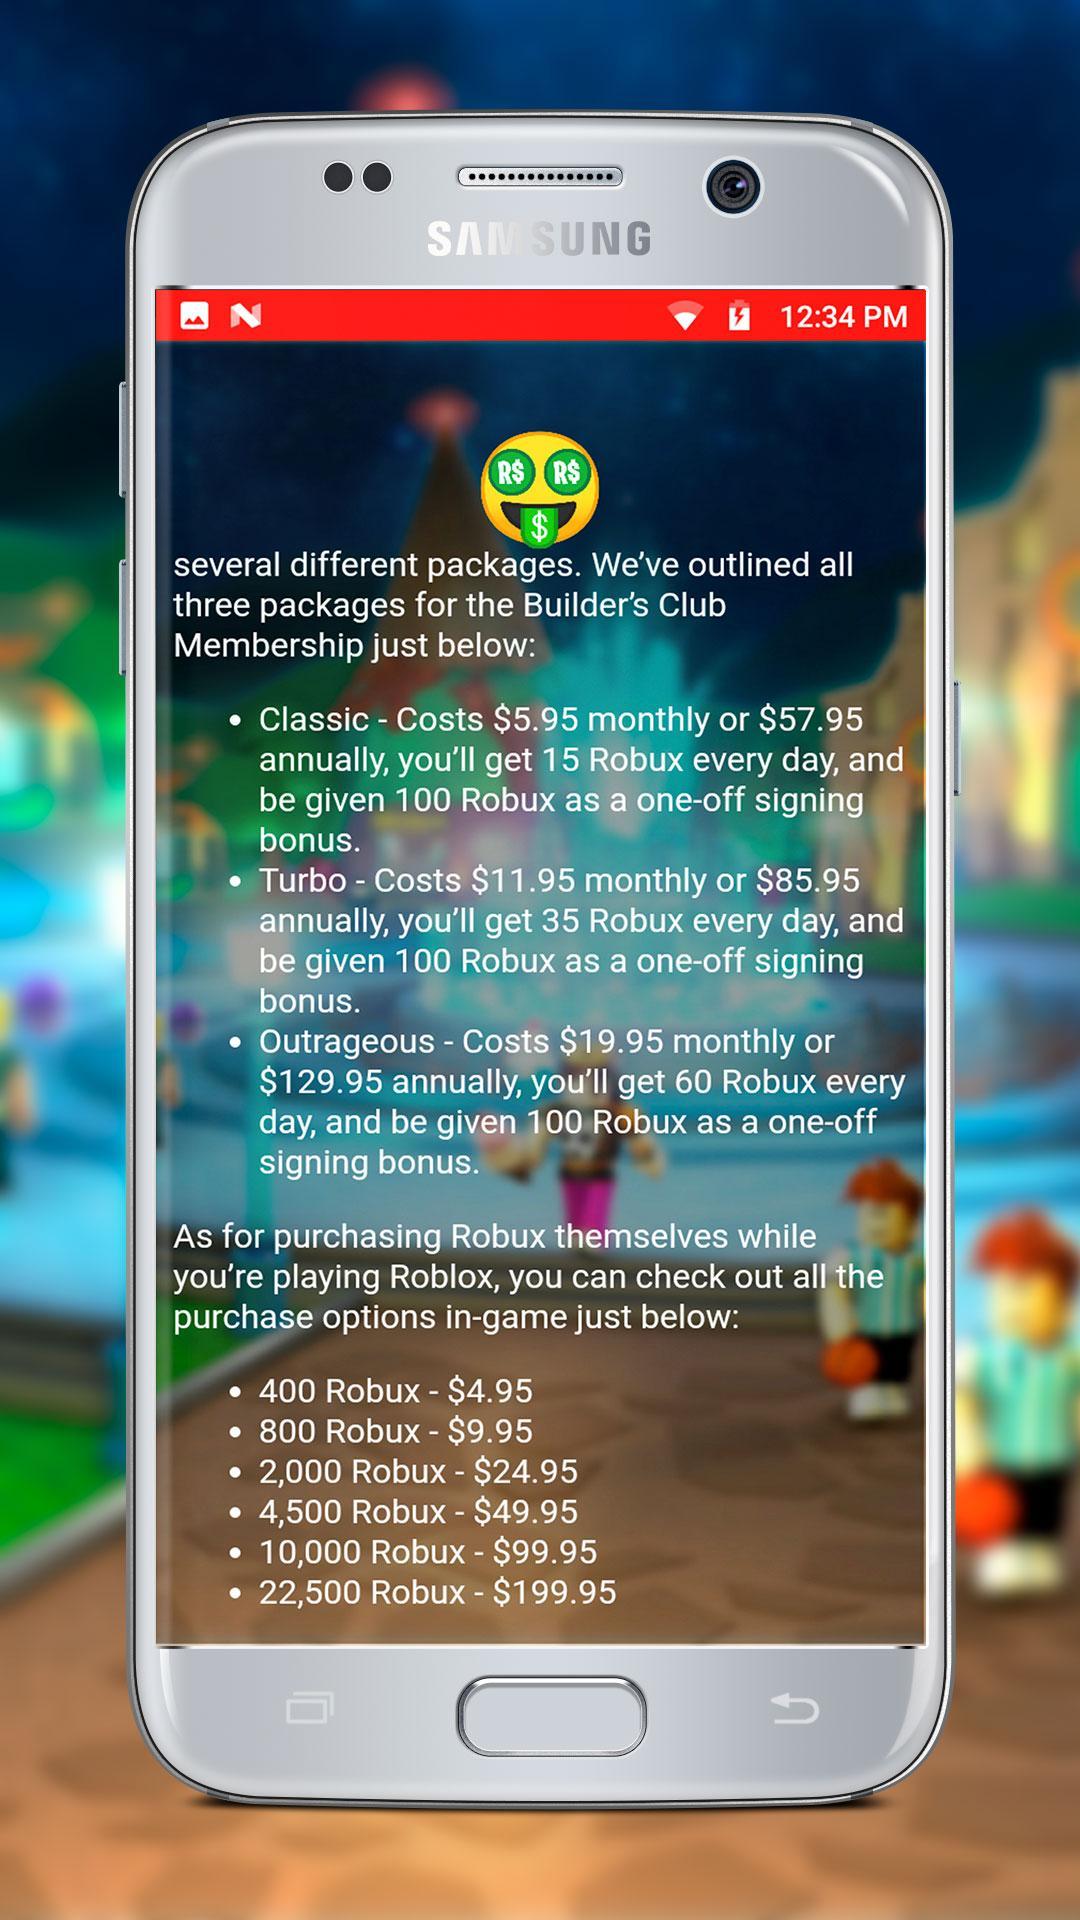 Myfan Robux Guide Tips Free 2019 Rblx For Android Apk - guide for roblox heroes of robloxia for android apk download